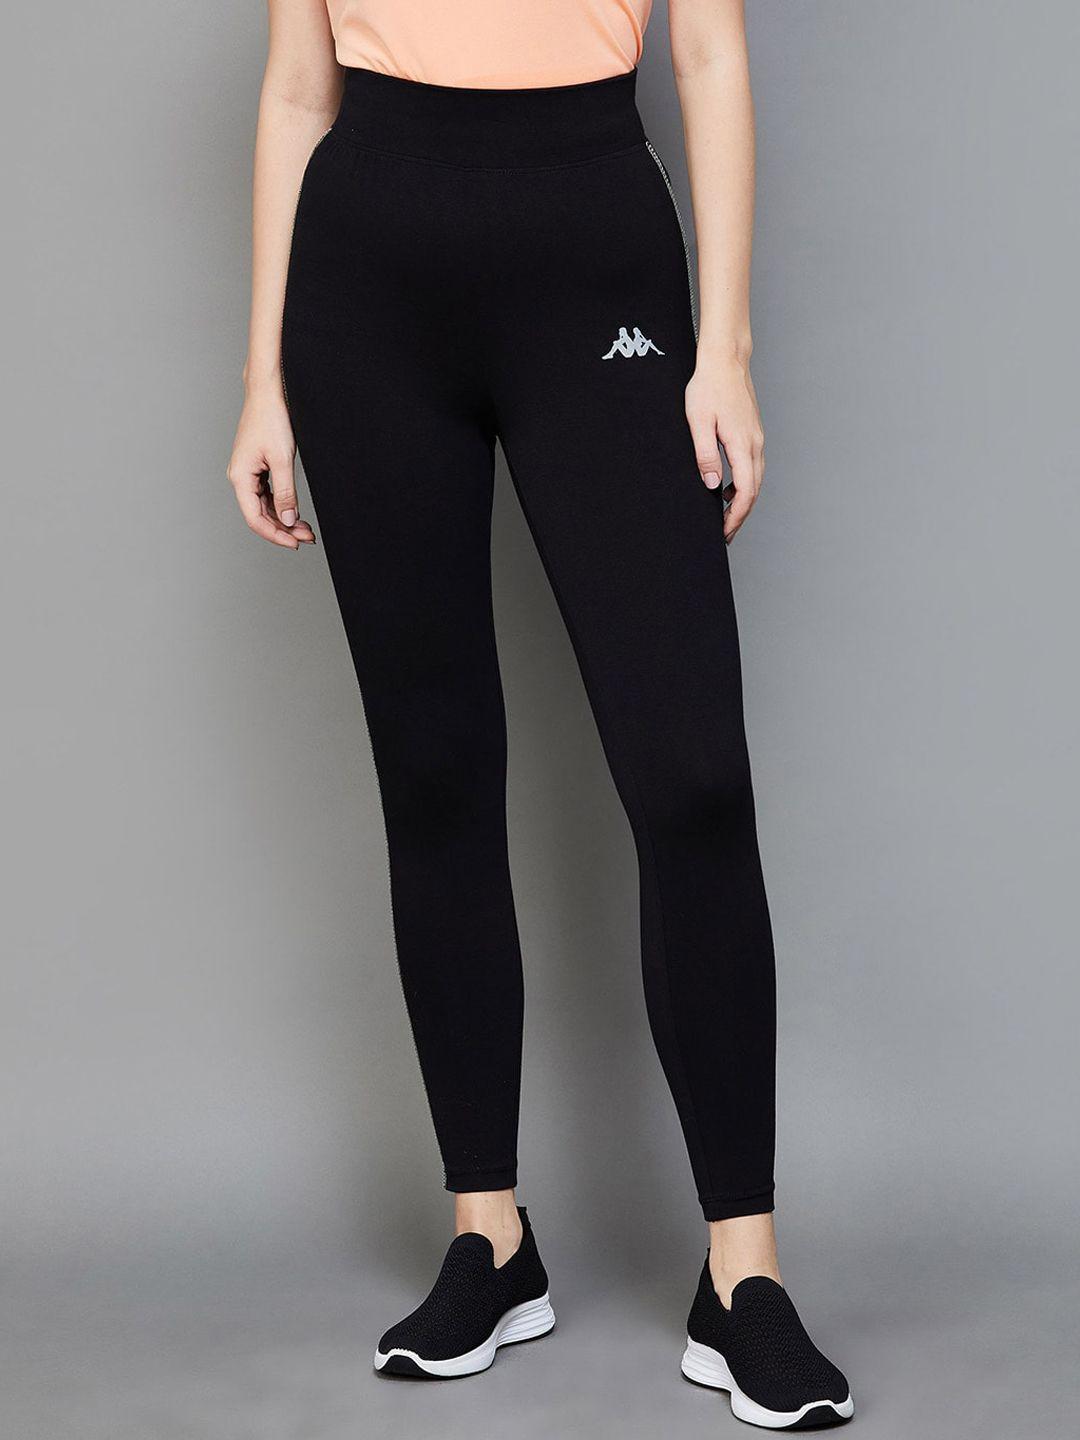 kappa cotton ankle-length gym tights